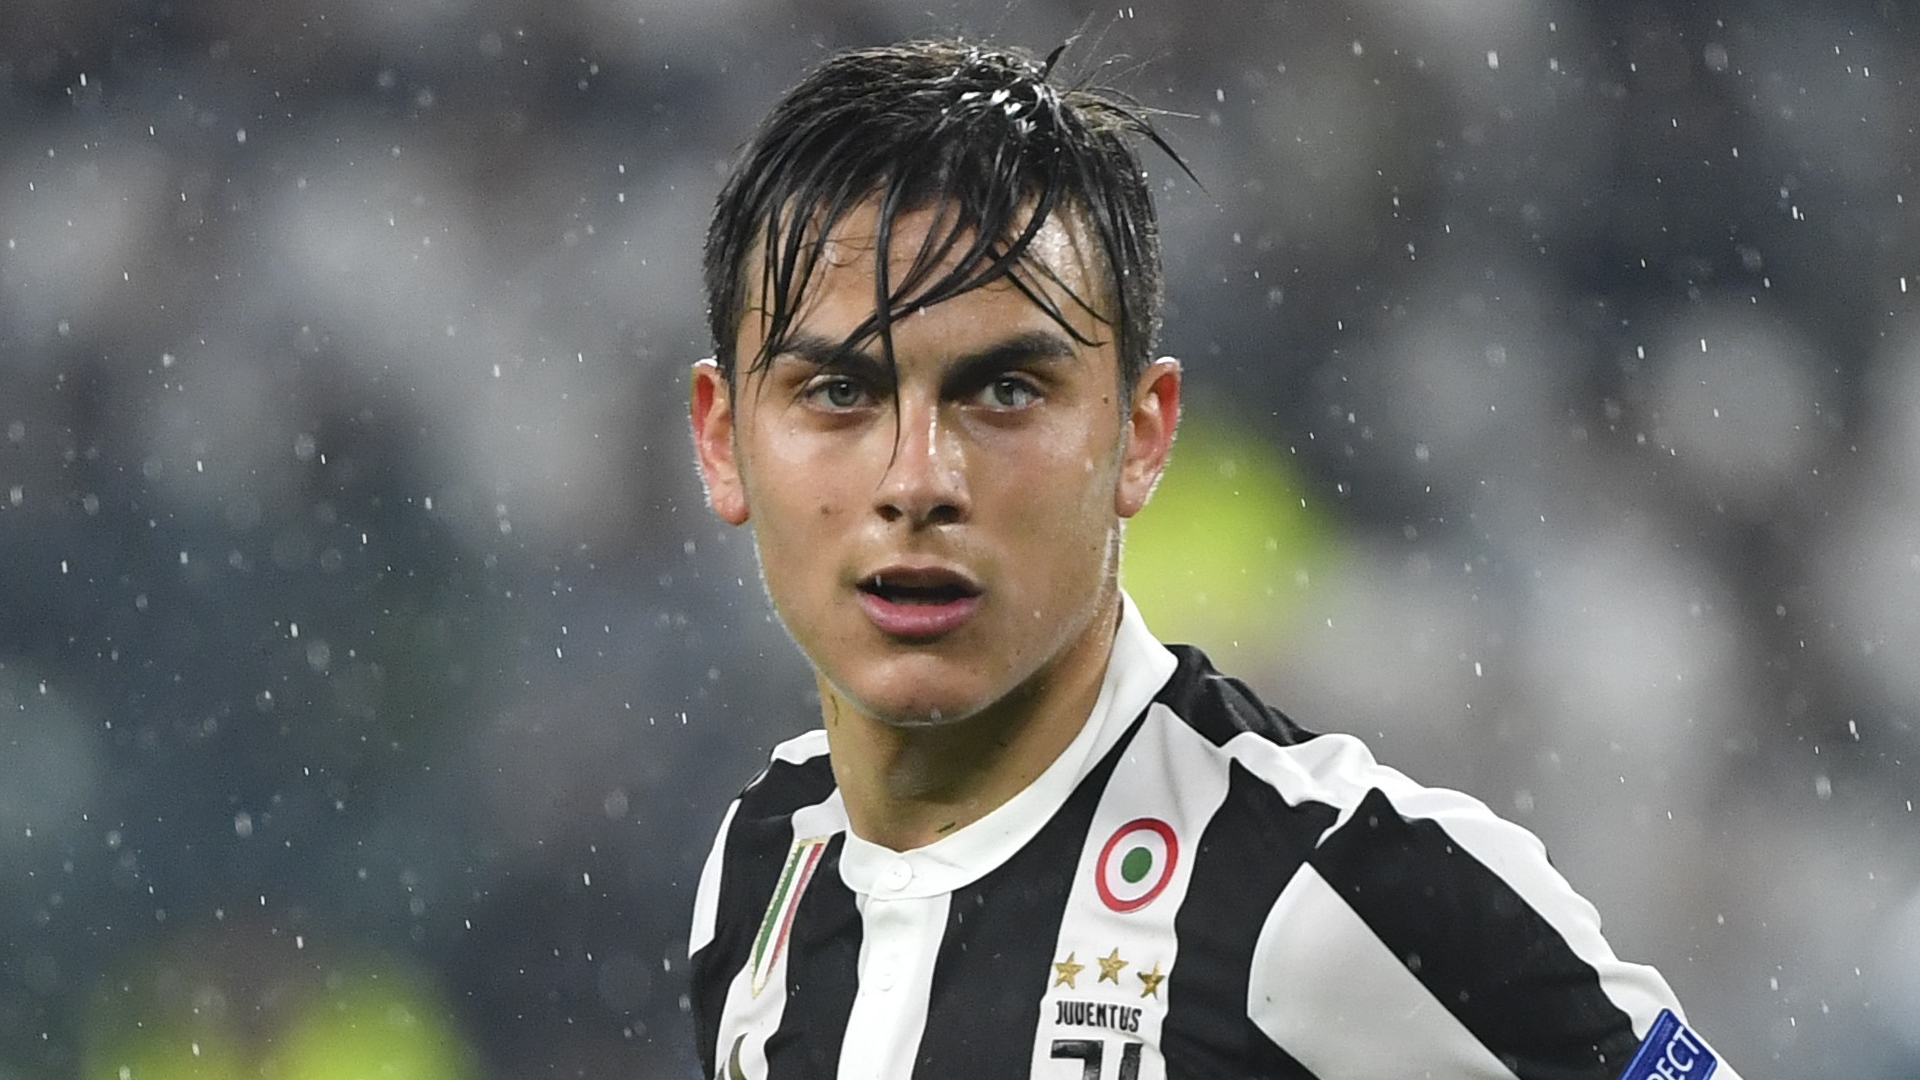 Messis Heir Dybala Risks World Cup And Scudetto Misery After